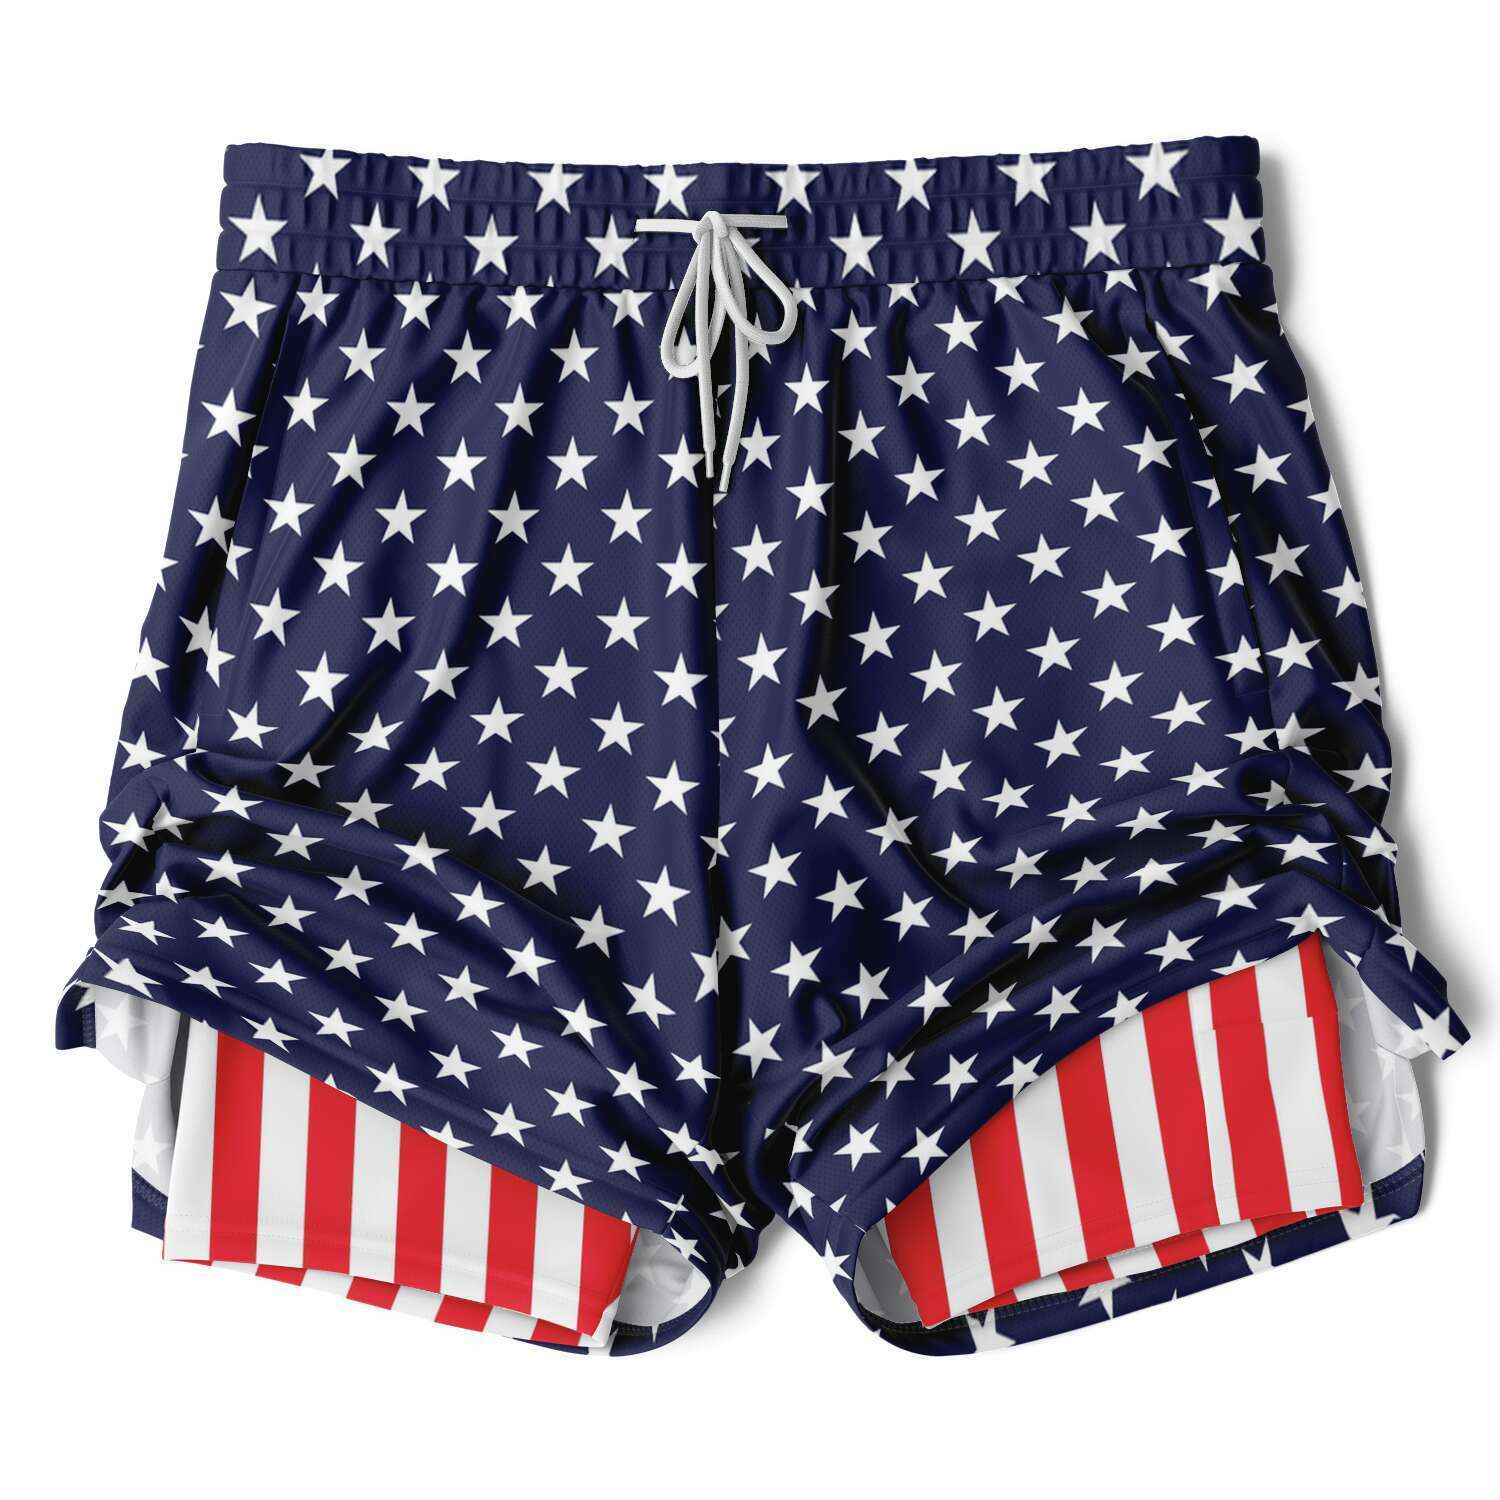 Rad Palm America Shirt and 2 in 1 Shorts Set.